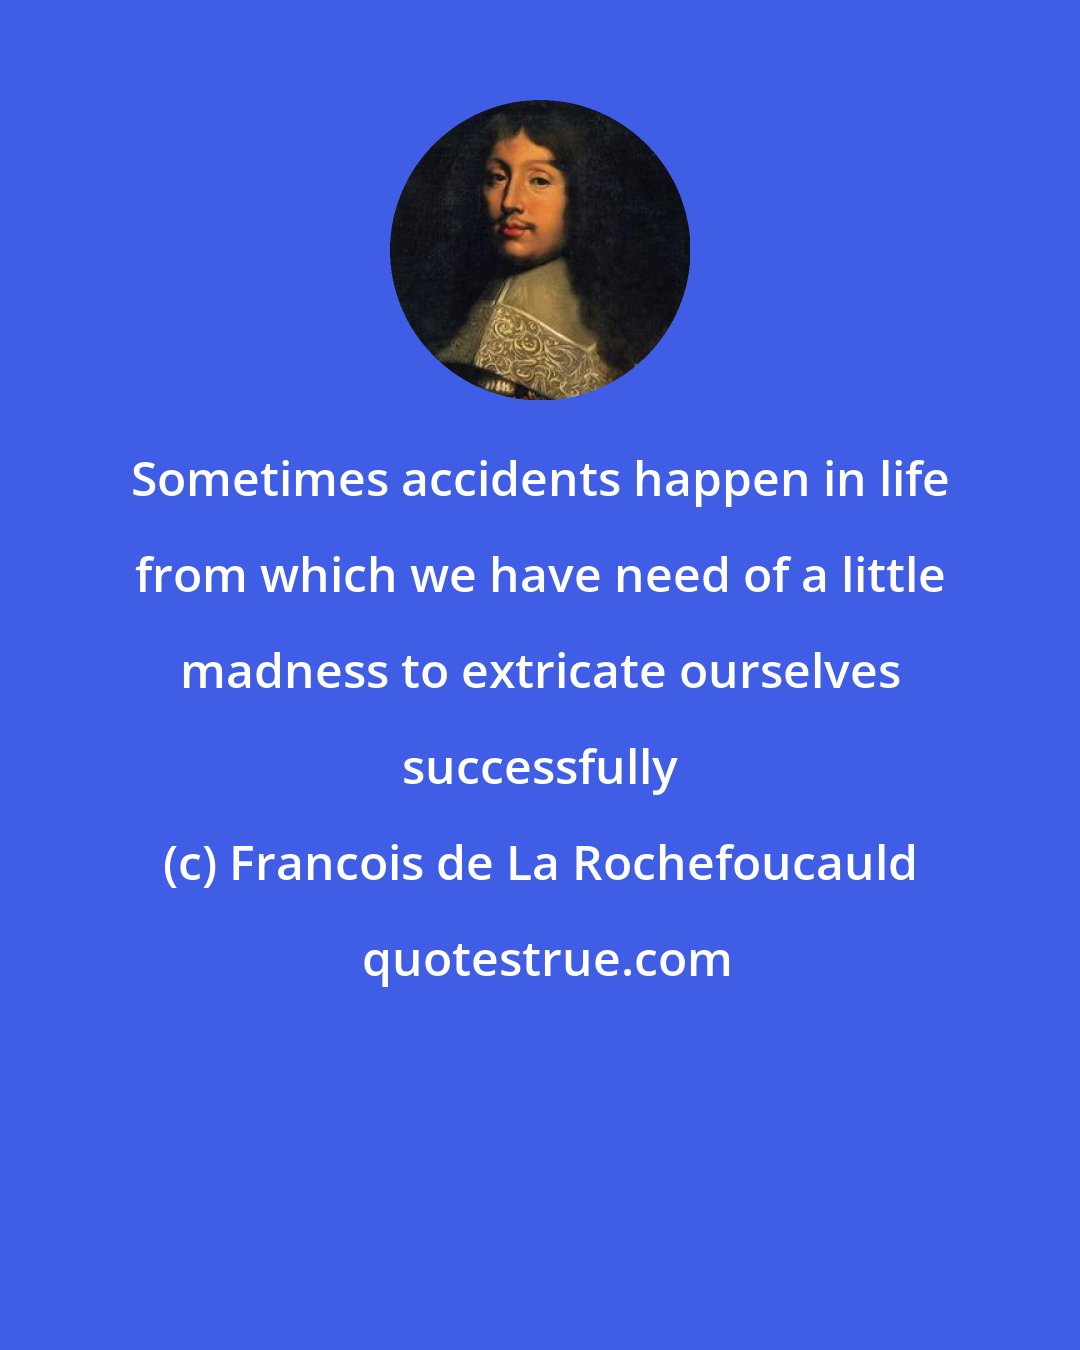 Francois de La Rochefoucauld: Sometimes accidents happen in life from which we have need of a little madness to extricate ourselves successfully